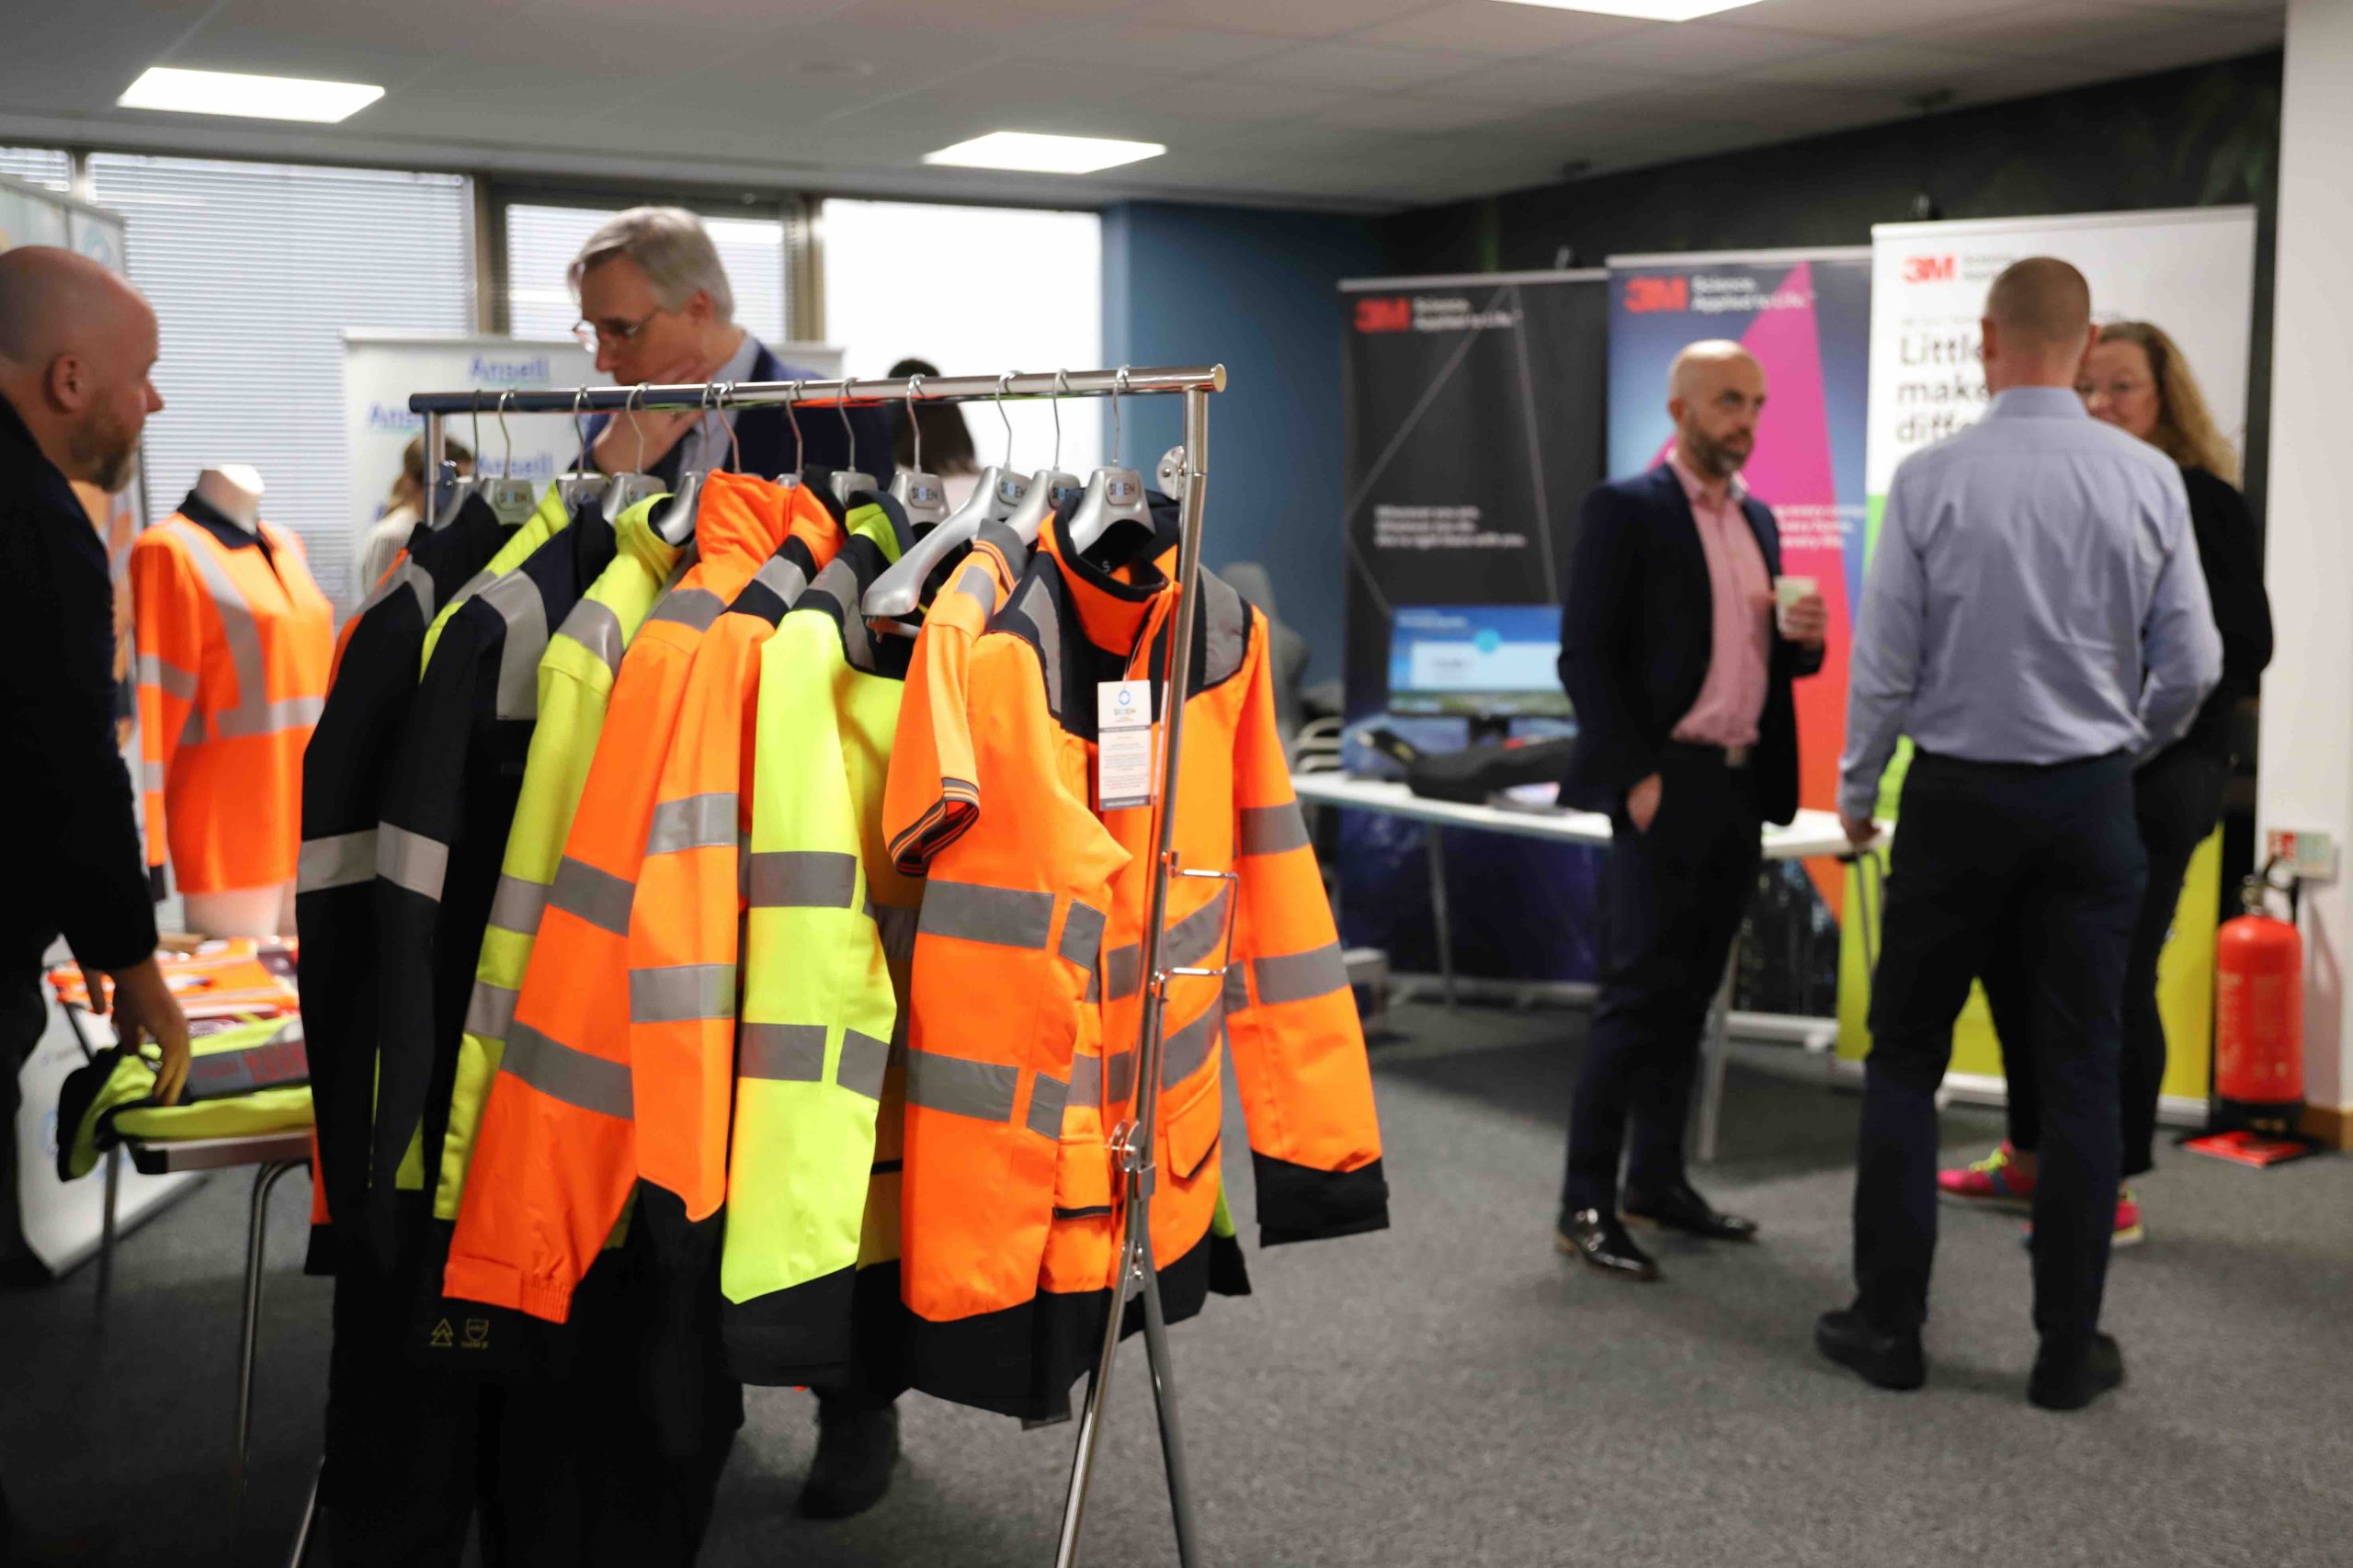 RS brings together health and safety industry professionals and PPE buyers to share insights on sustainability